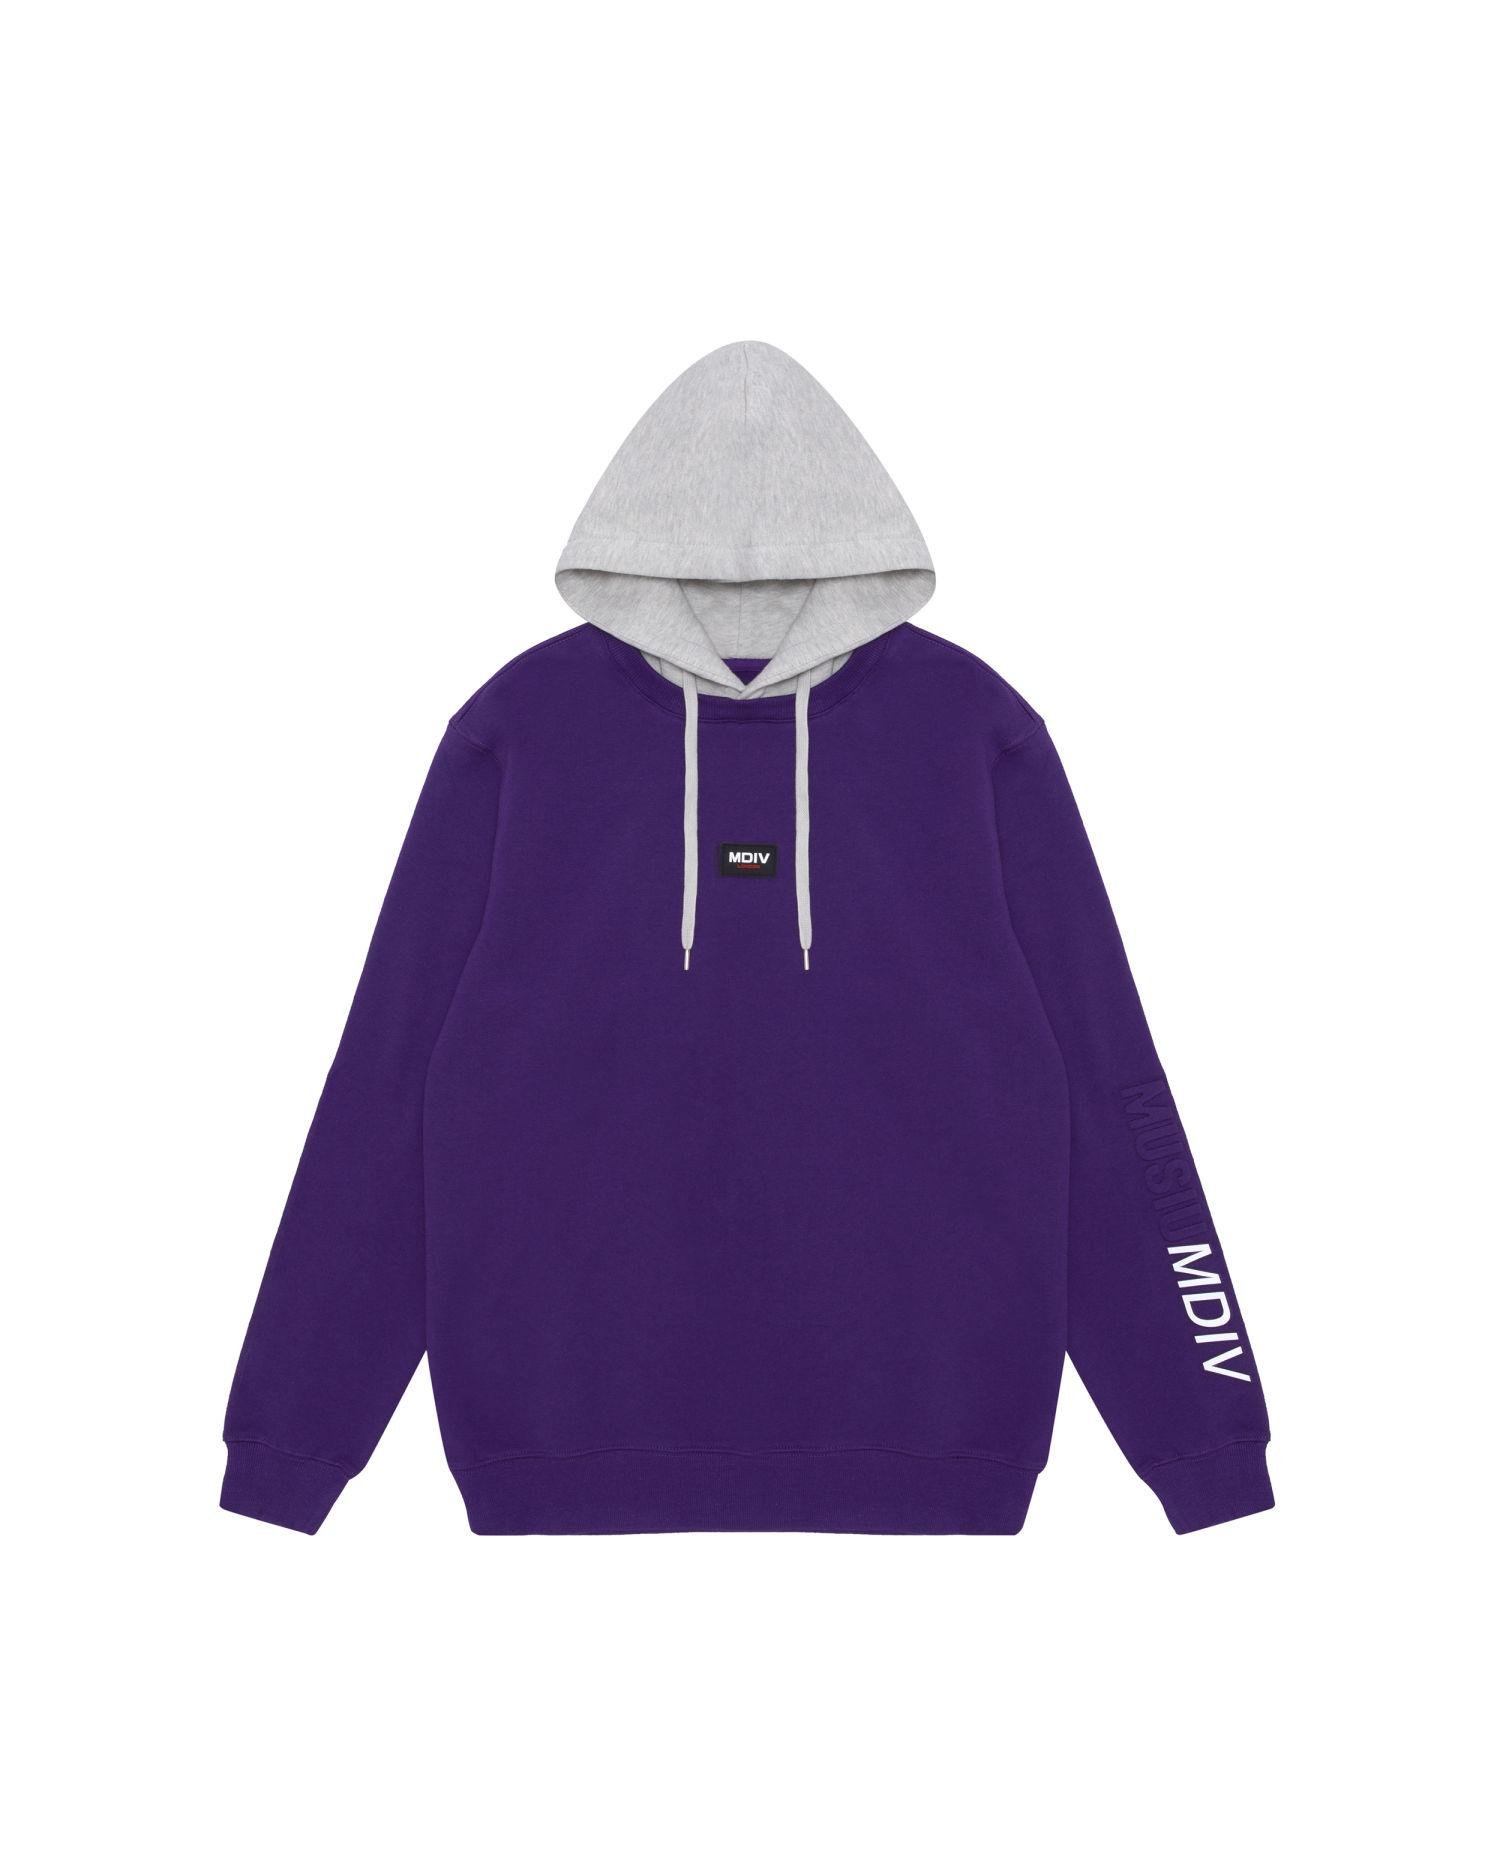 Patch hoodie by MUSIUM DIV.